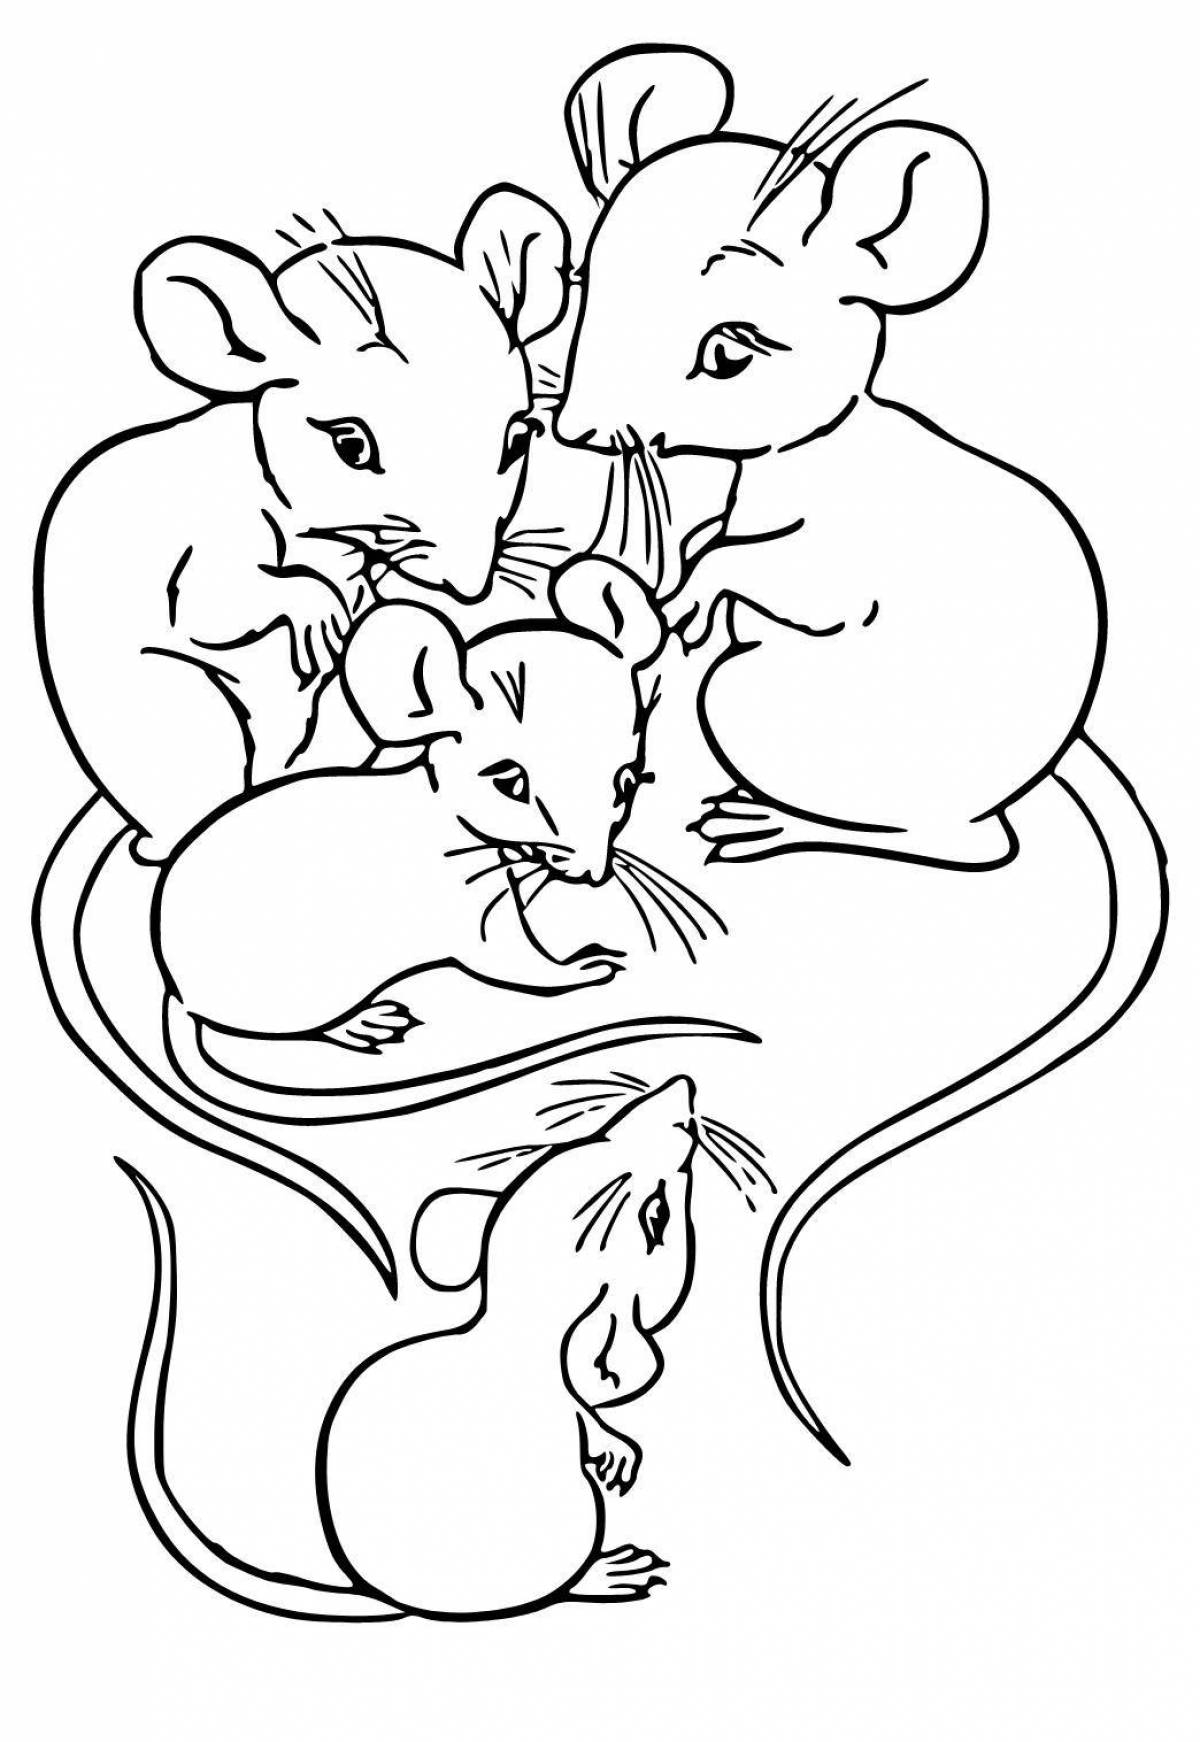 Colorful mouse and bear coloring page